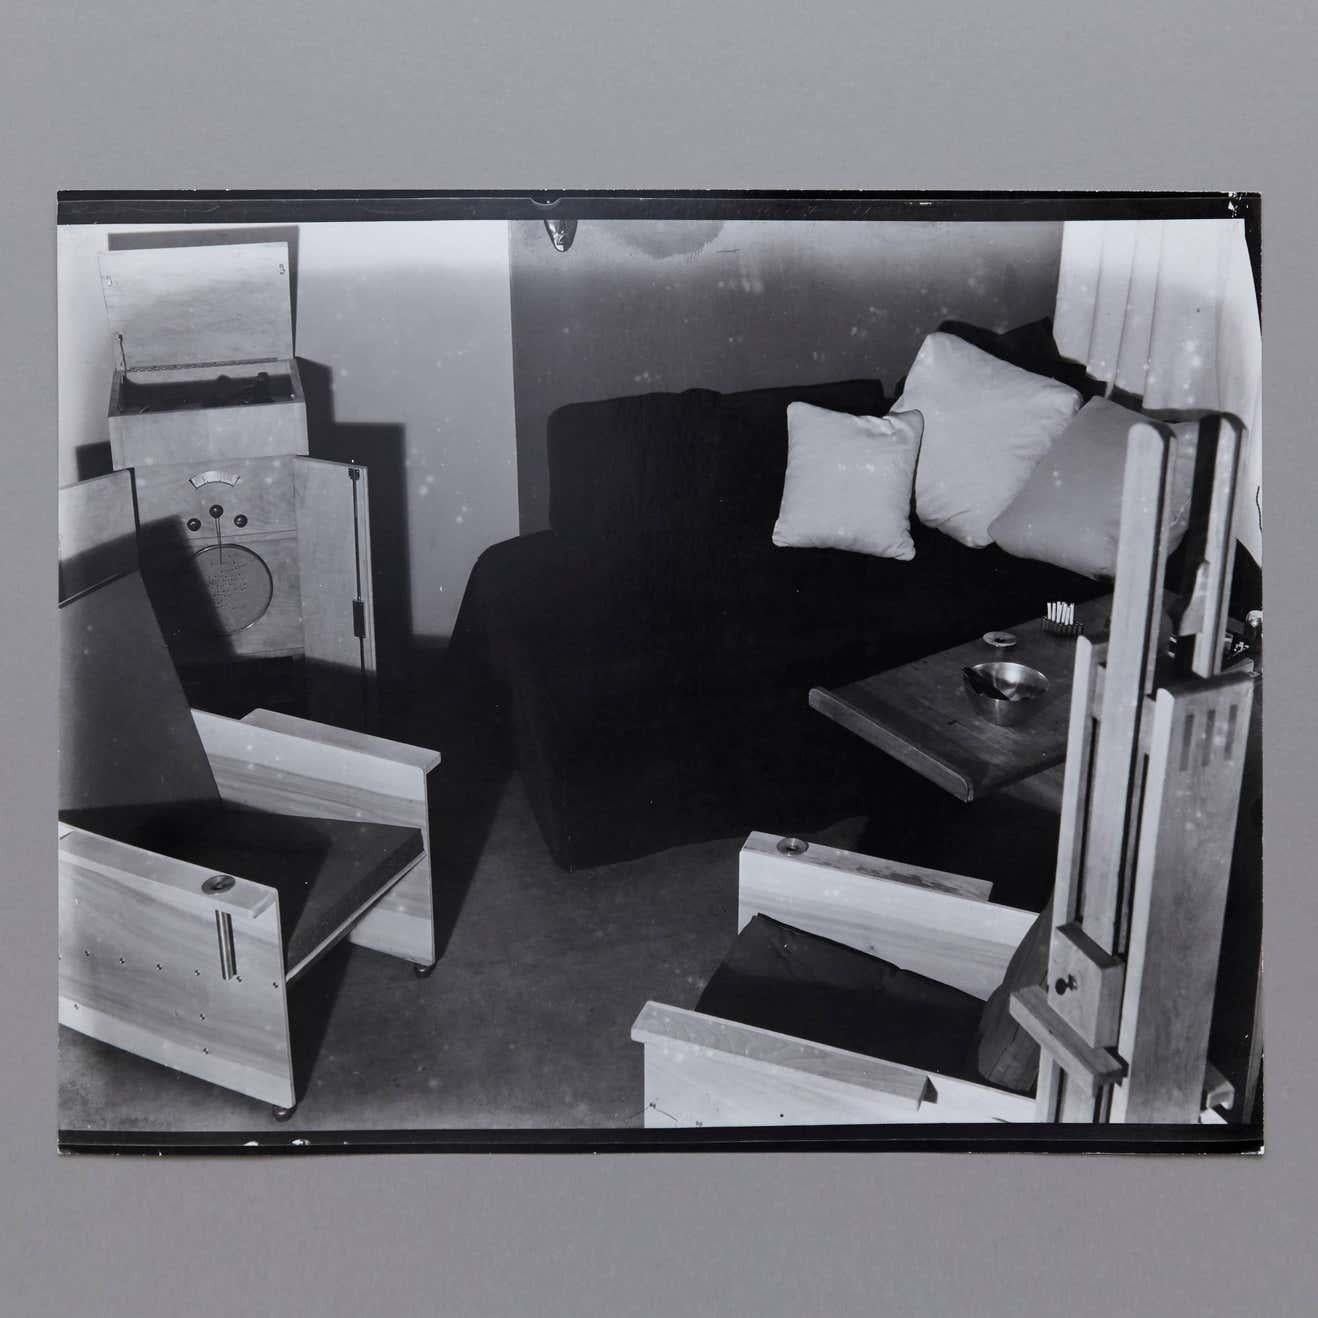 Man Ray Studio photographed by Man Ray.

A posthumous print from the original negative circa 1970 by Pierre Gassmann. Gelatin silver bromide.

Born (Philadelphia, 1890 - Paris, 1976) Emmanuel Radnitzky, Man Ray adopted his pseudonym in 1909 and